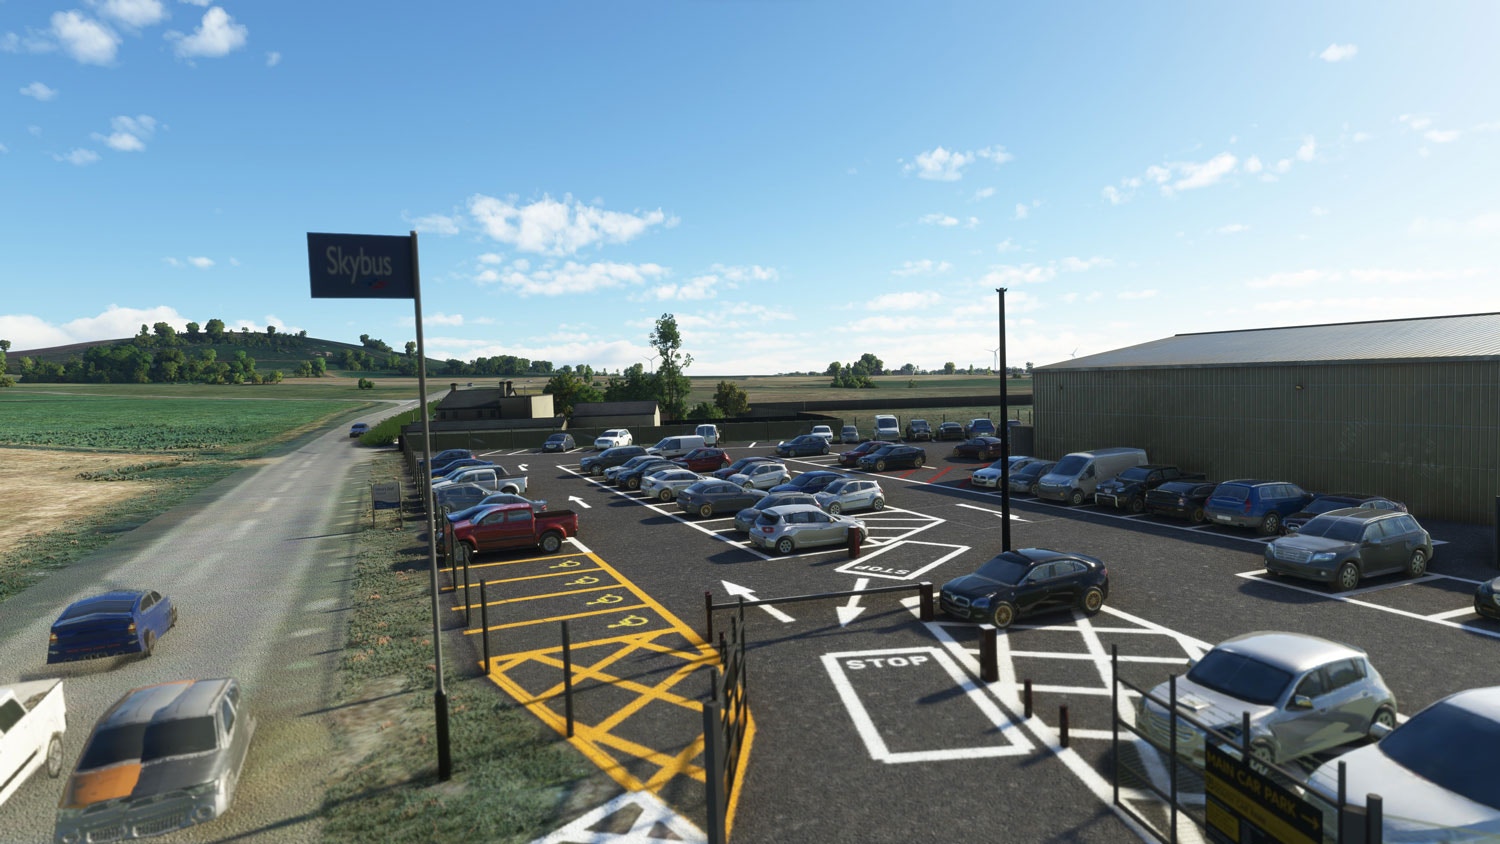 Aerosoft Airport Land's End Now Available for MSFS